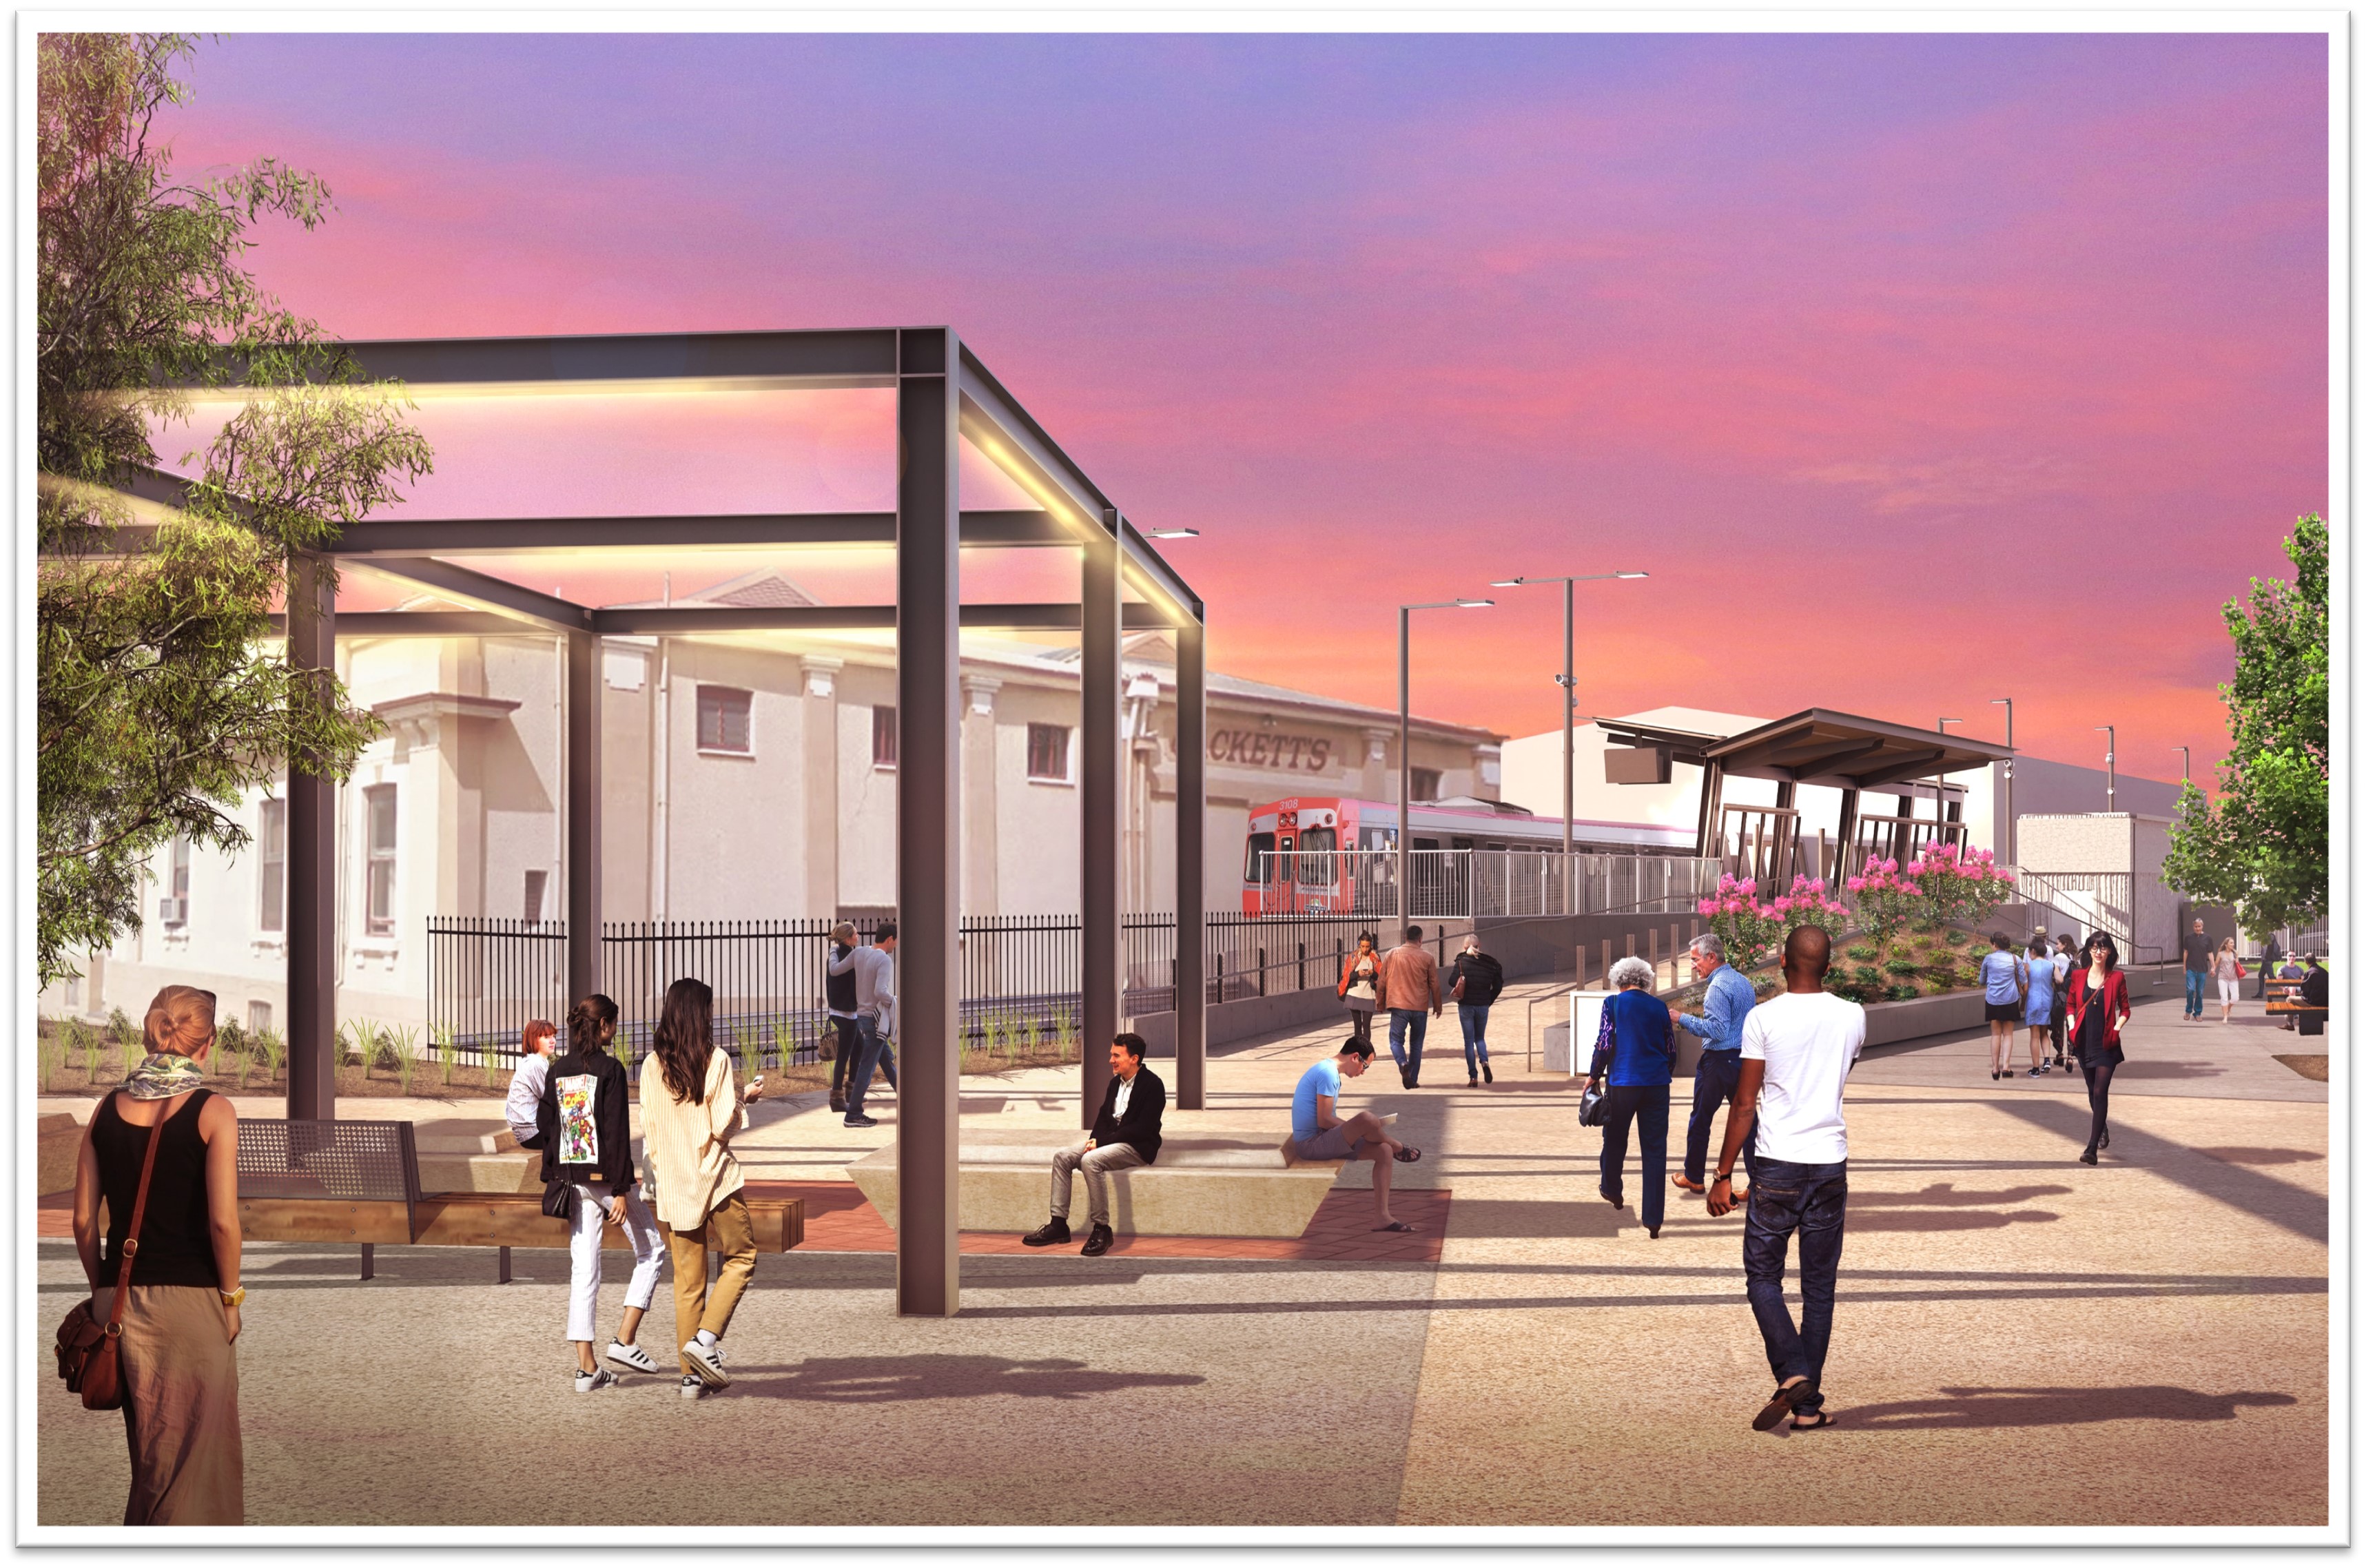 an artist impression of the new Port Dock station